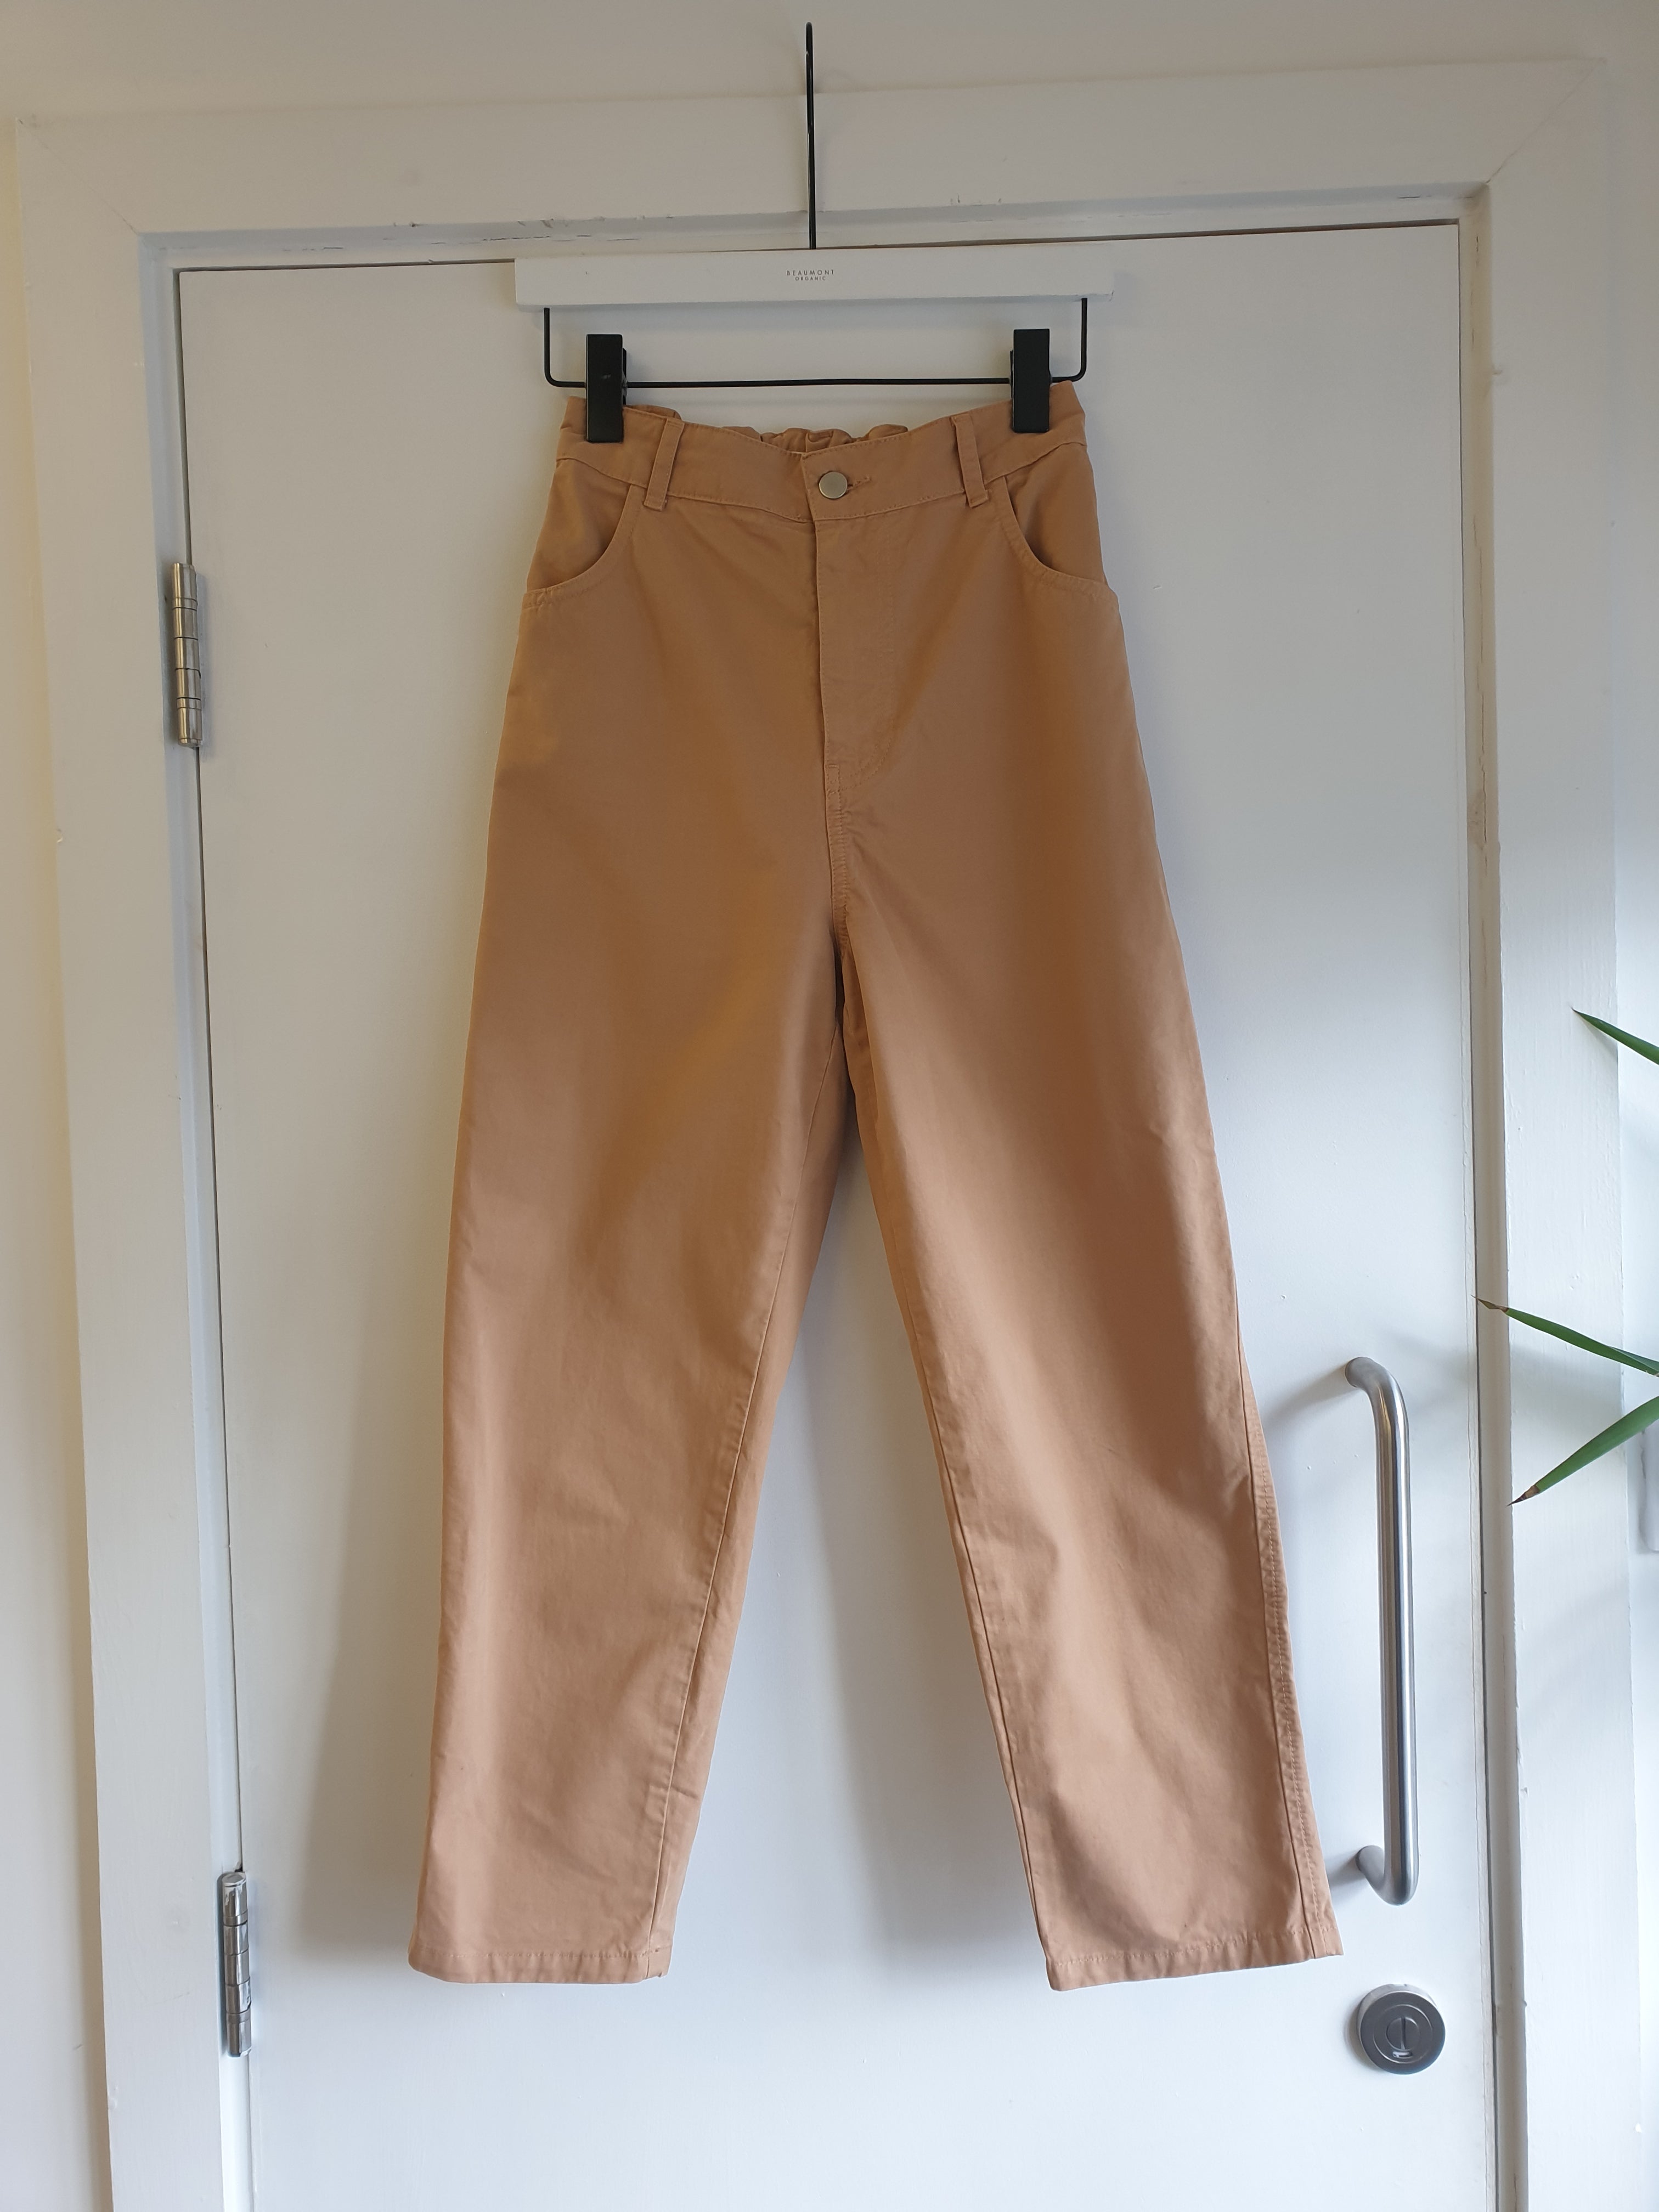 Tessa Trousers in Camel Size S